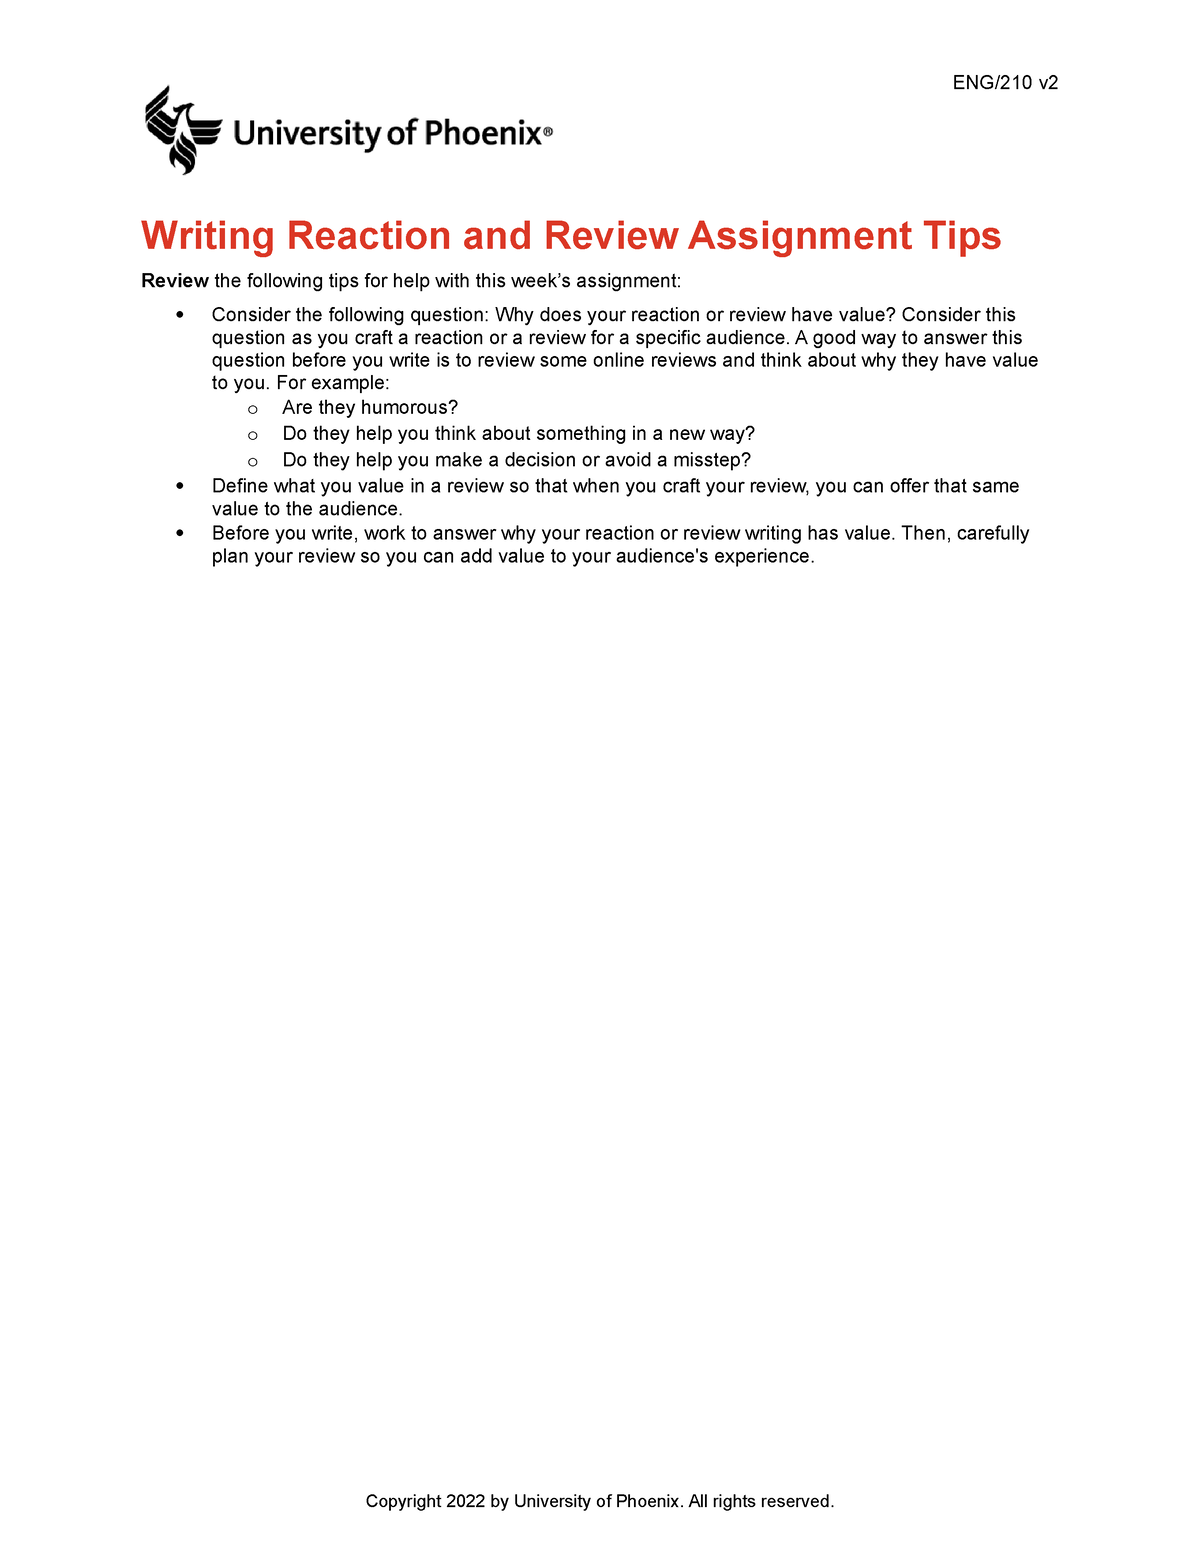 writing reaction and review assignment tips